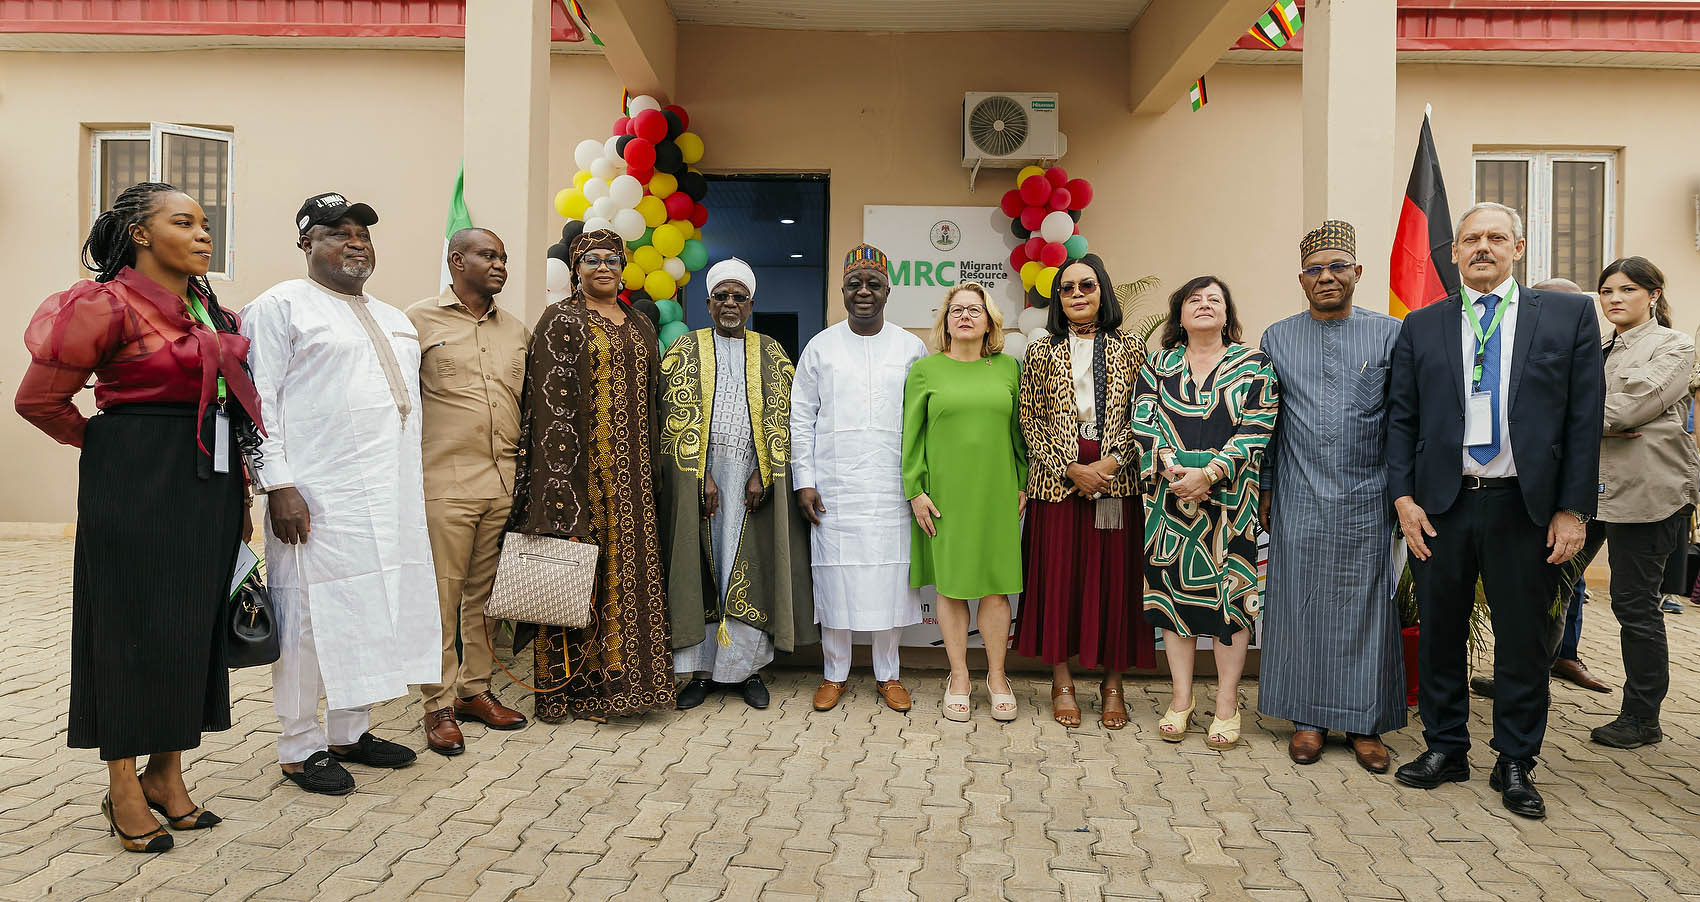 Official opening of the "Migration Resource Centre" in Nyanya. It is part of a network in Nigeria. The advice centres are run by the Nigerian government on its own responsibility and are supported by the BMZ's "Centres for Migration and Development" lighthouse initiative. German development cooperation is already present in three locations in Nigeria: Abuja, Benin City and Lagos.